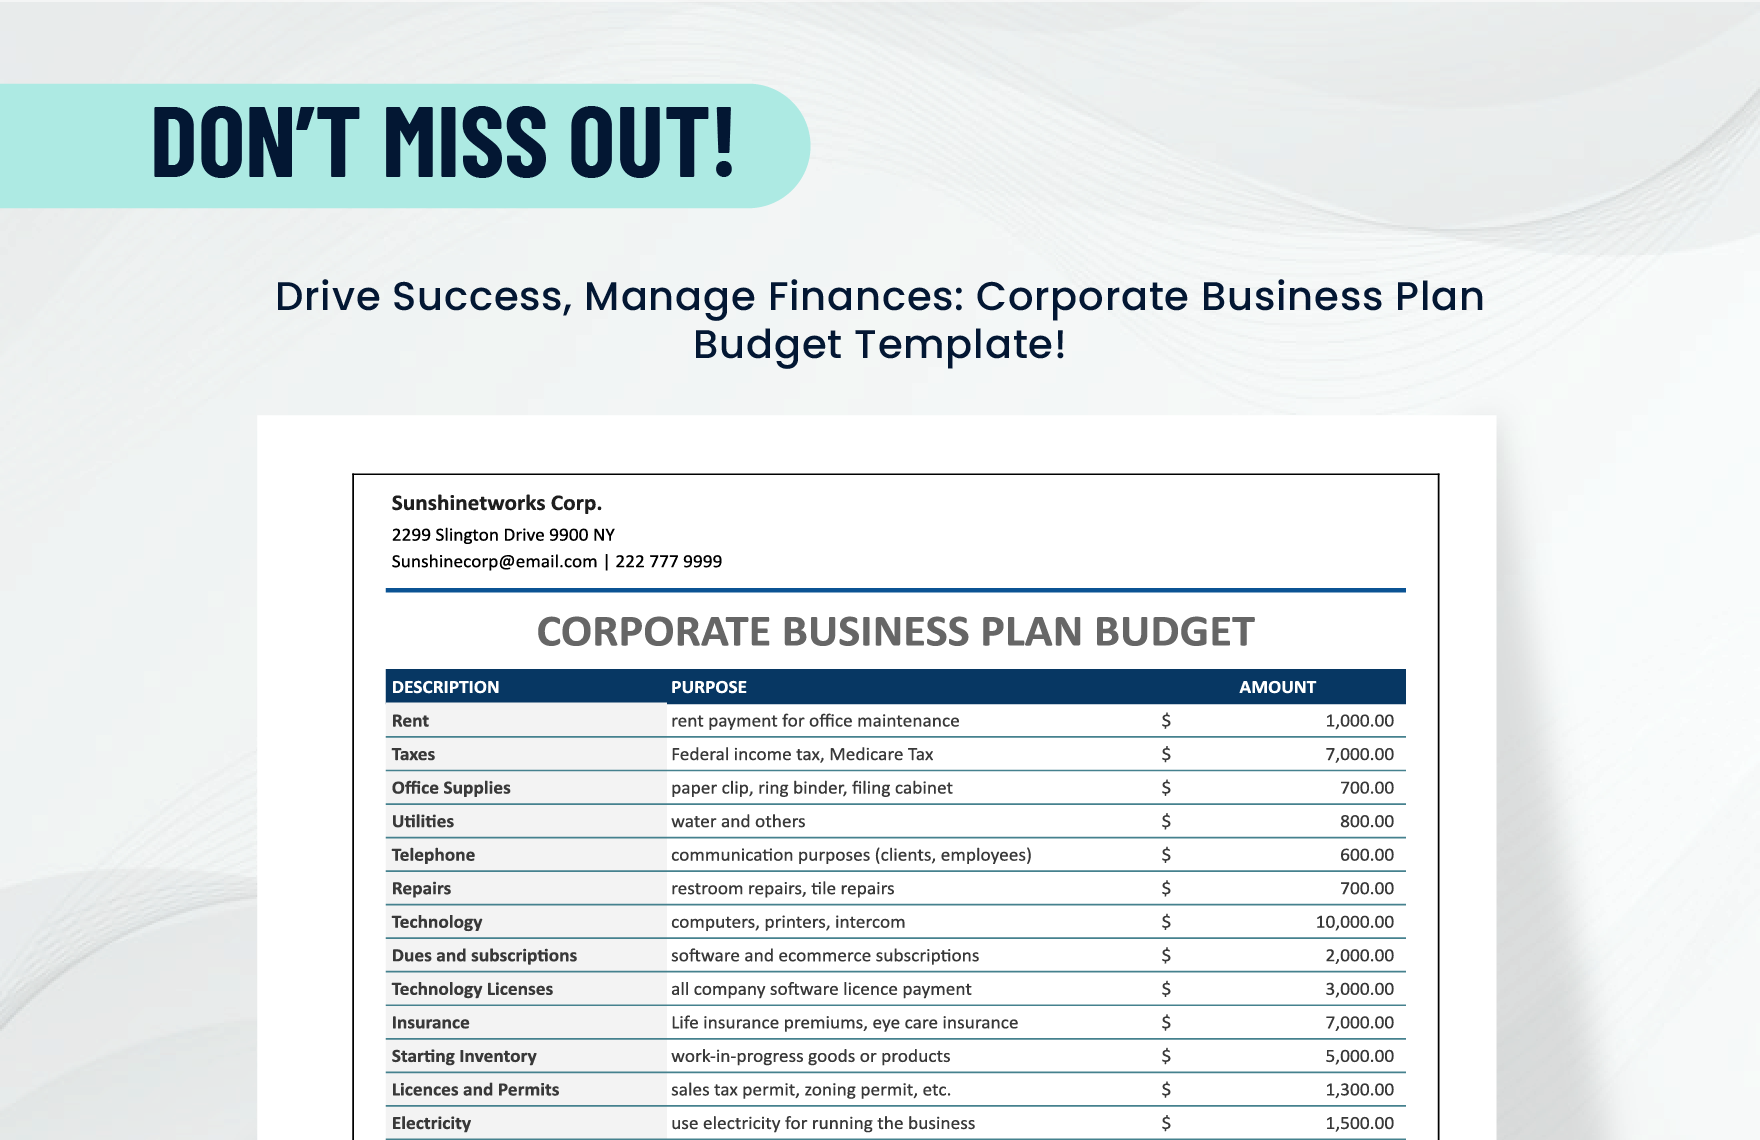 Corporate Business Plan Budget Template